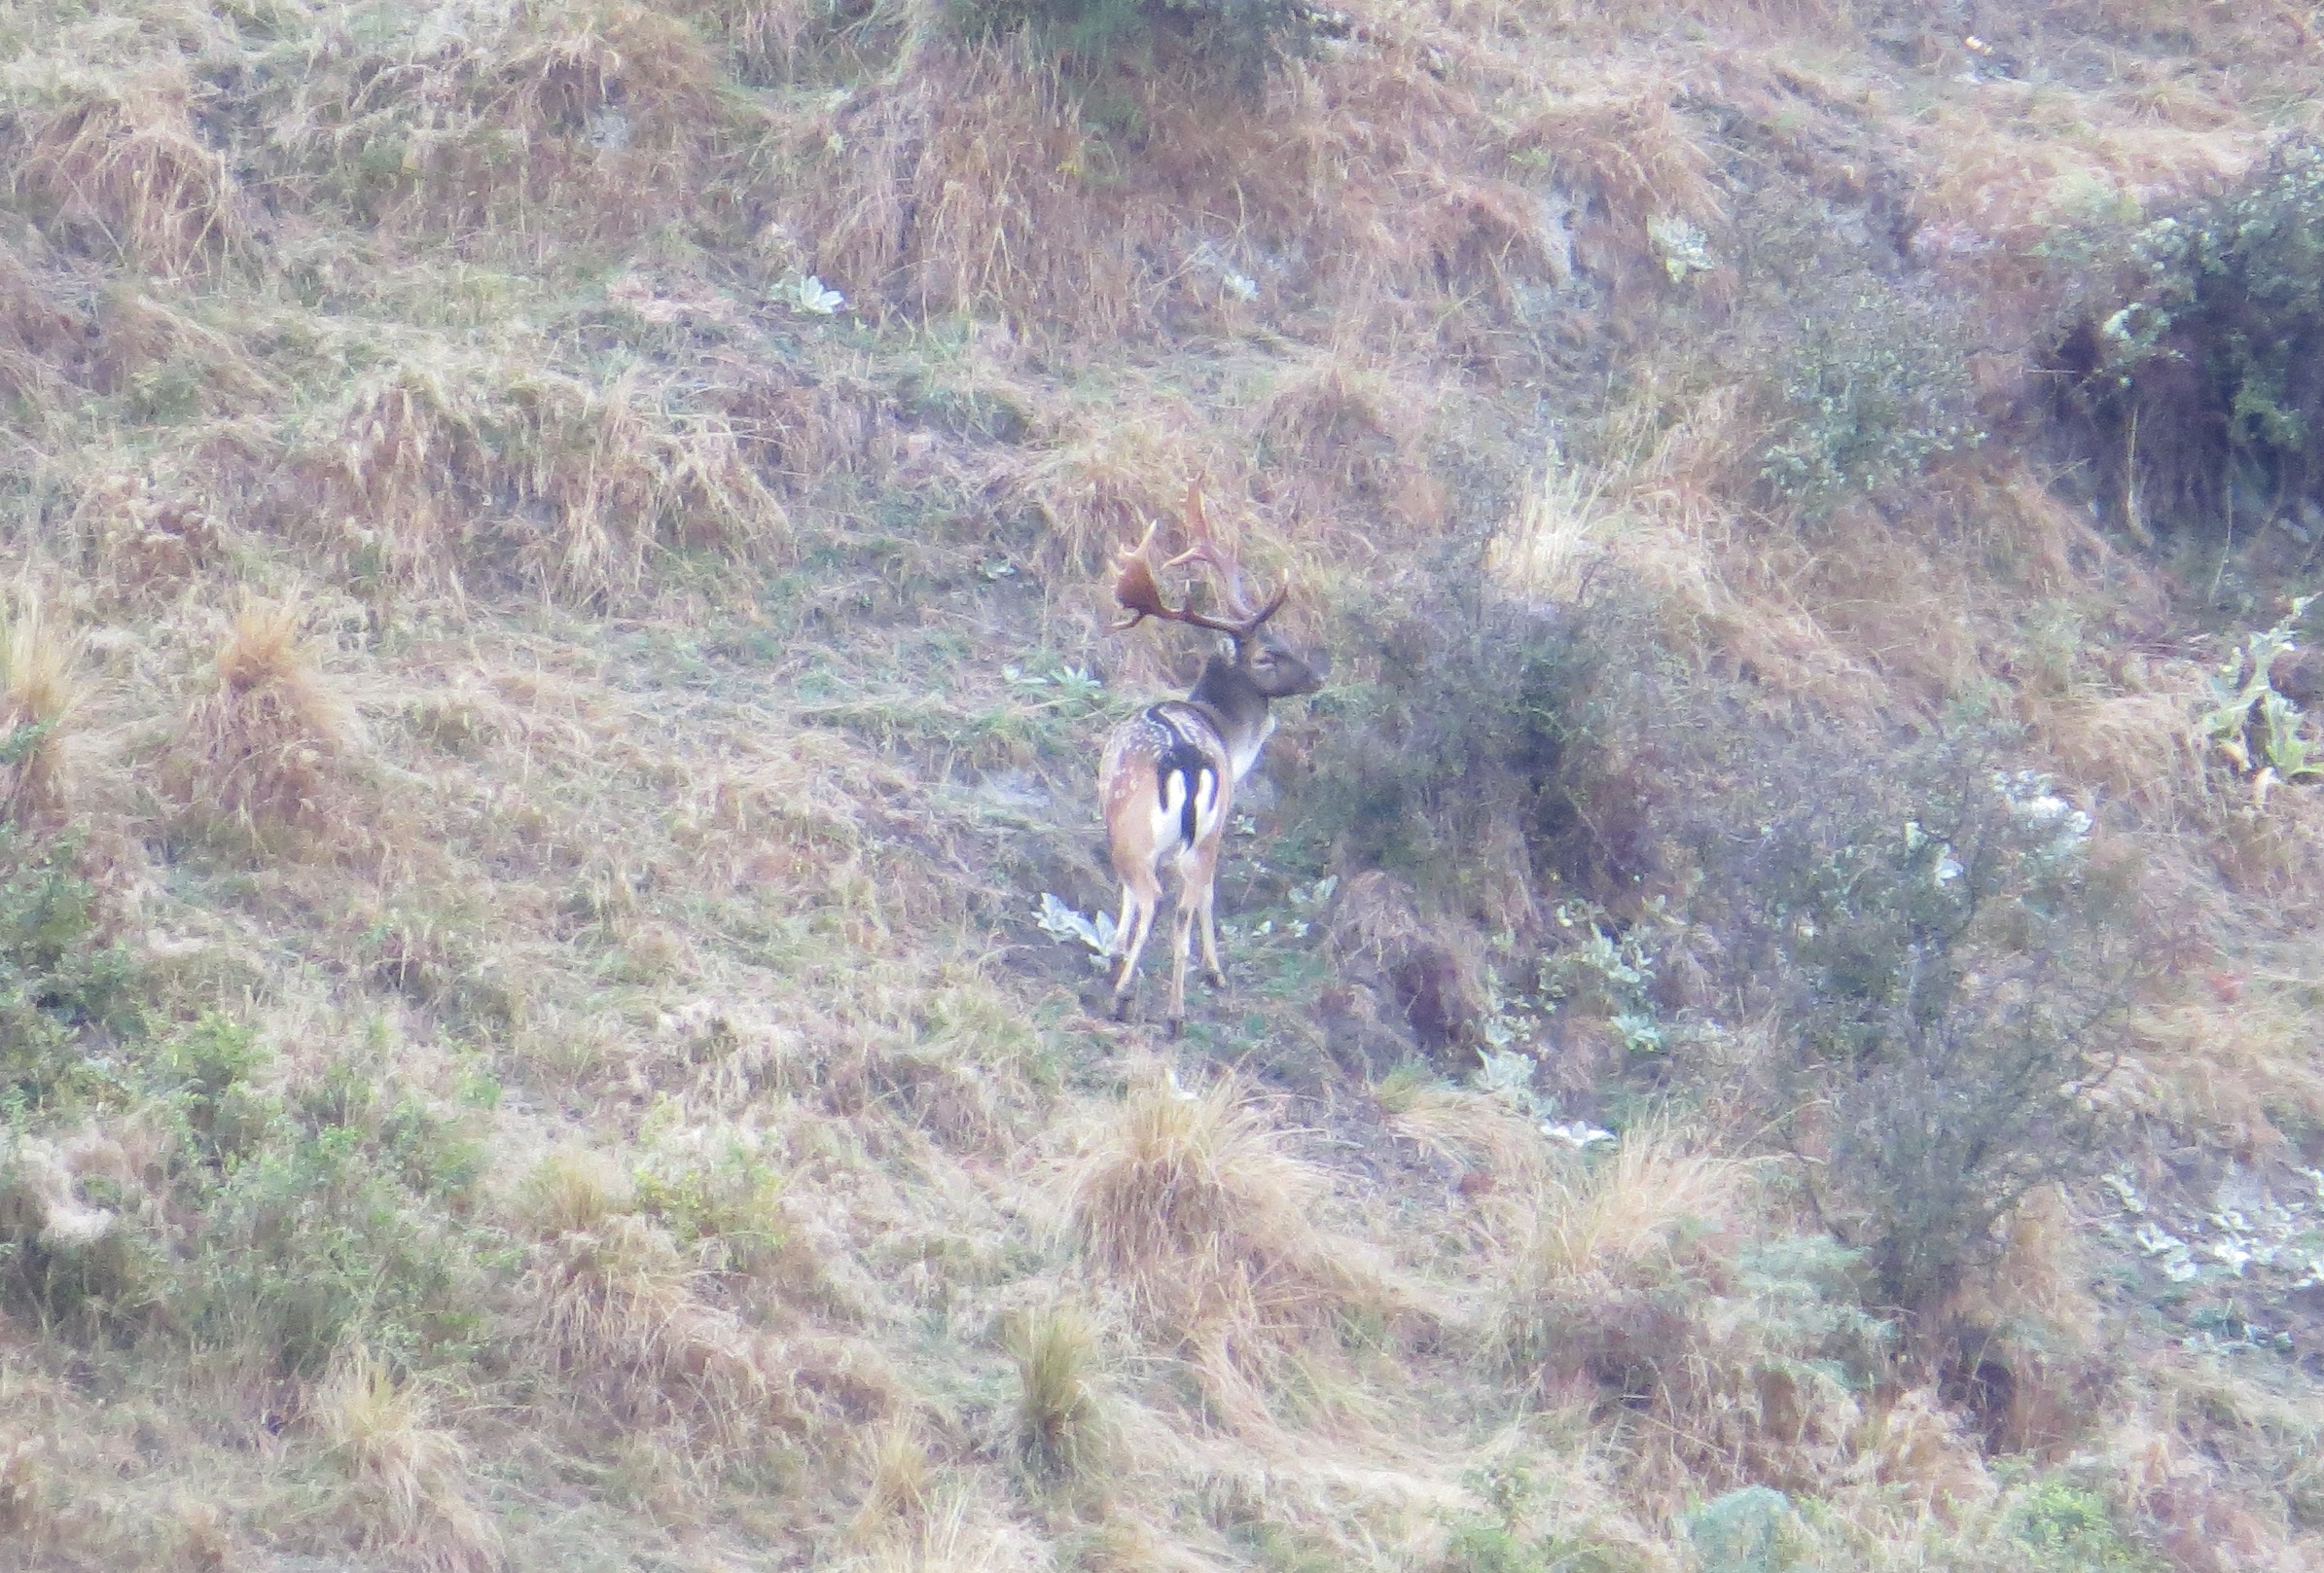  A mature fallow buck caught out in the open - photo Ryan Carr 